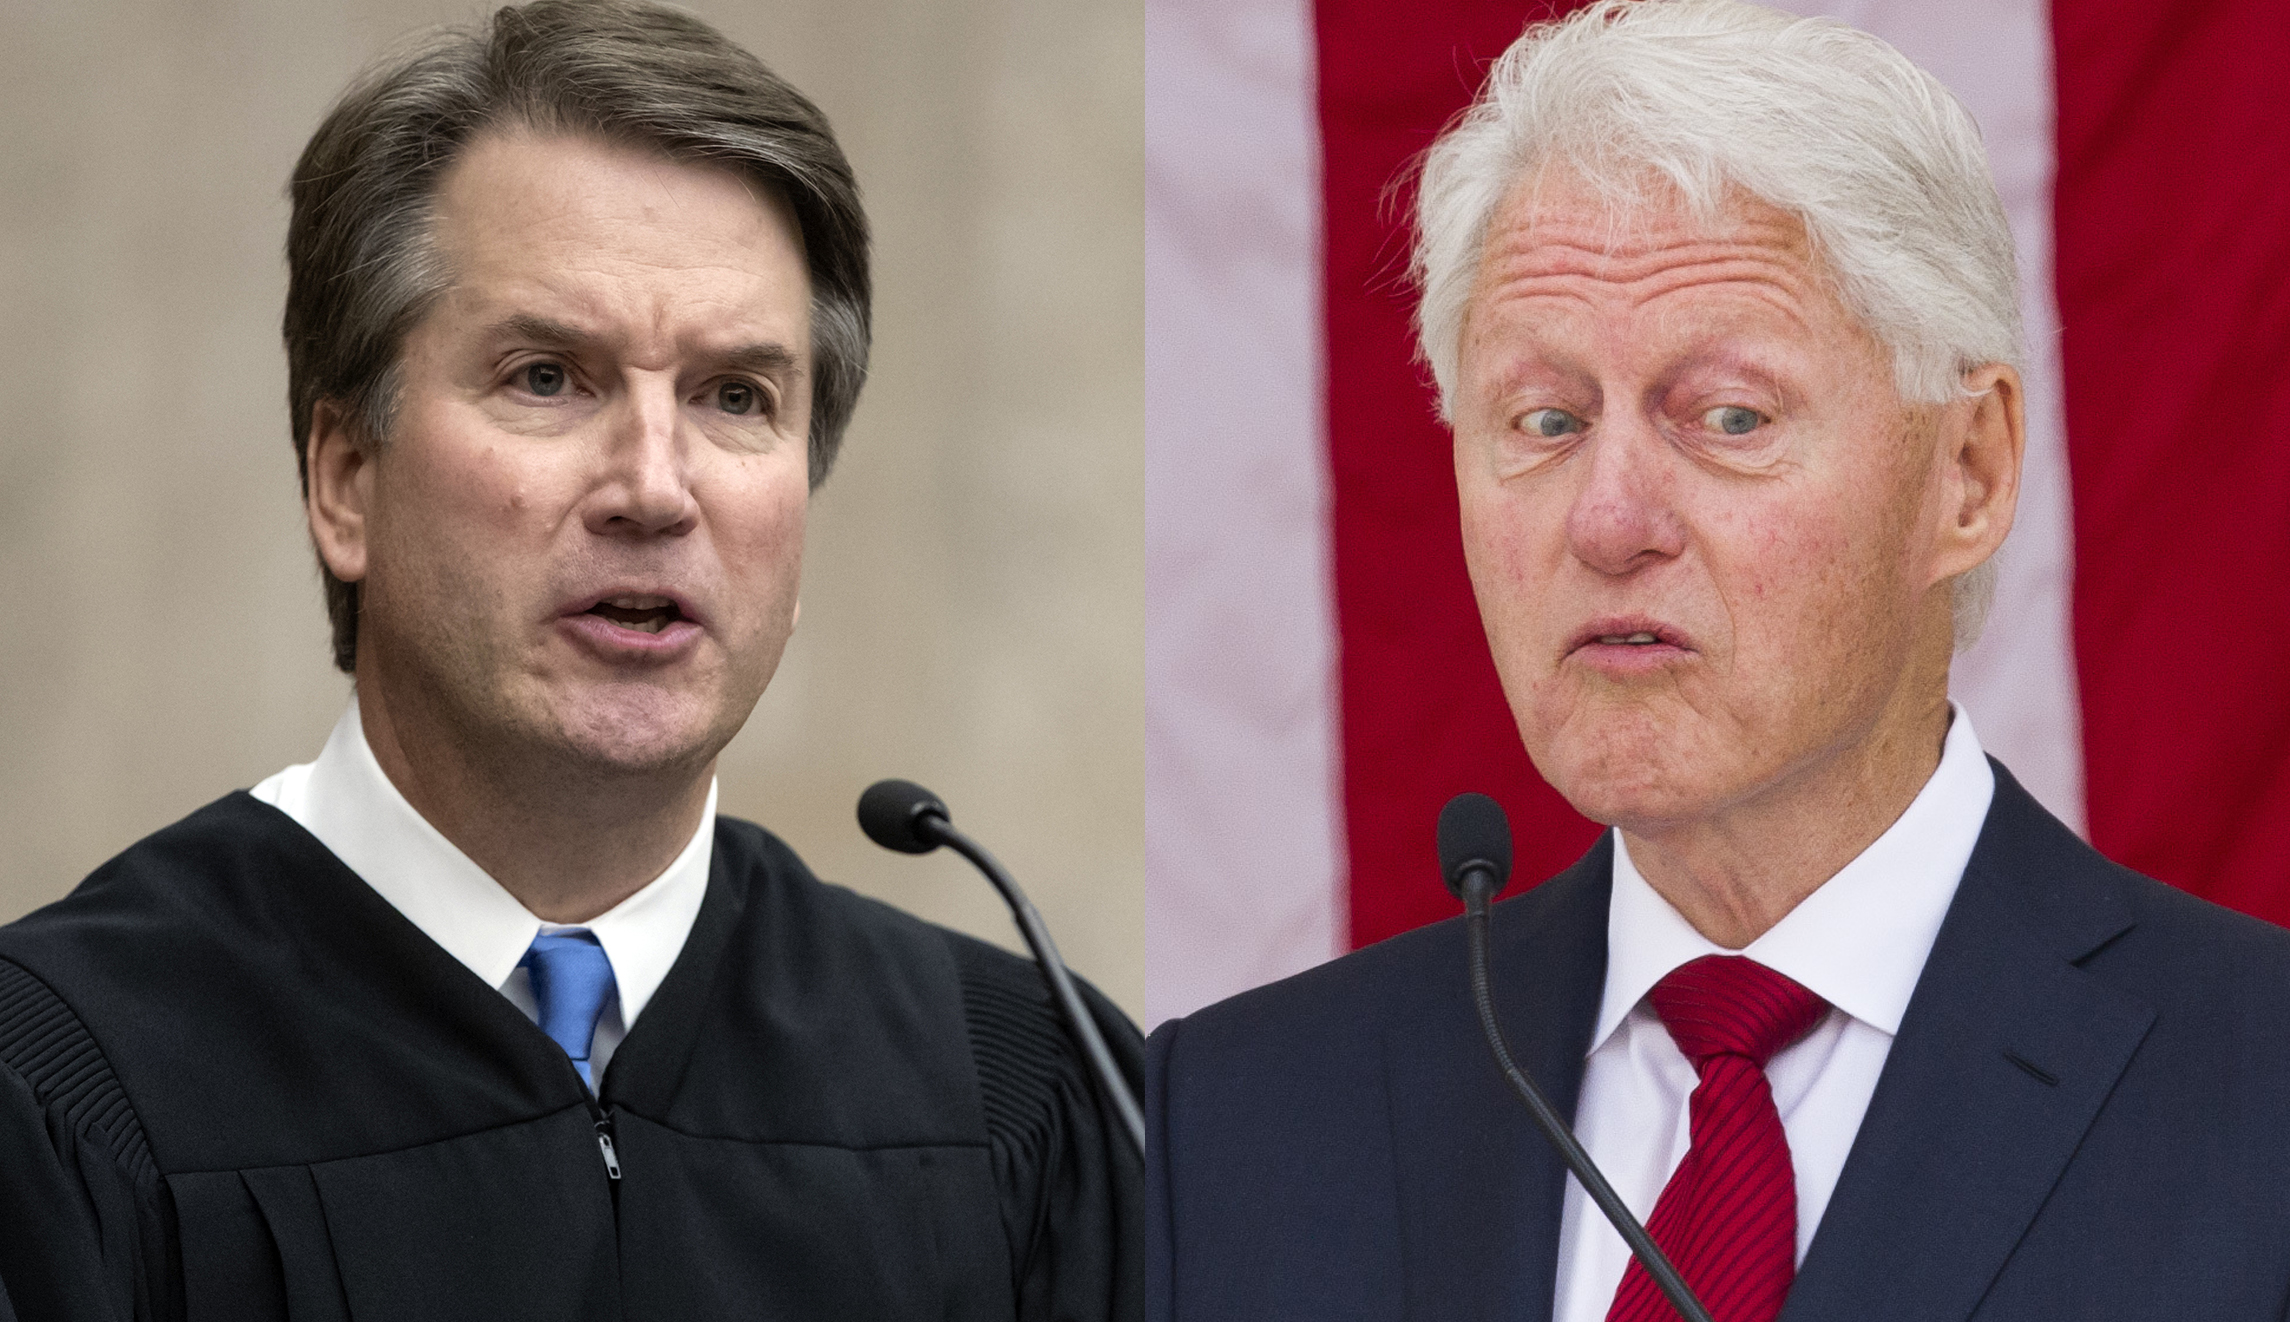 Brett Kavanaugh Proposed List Of Sexually Explicit Questions For Bill Clinton Memo Shows 